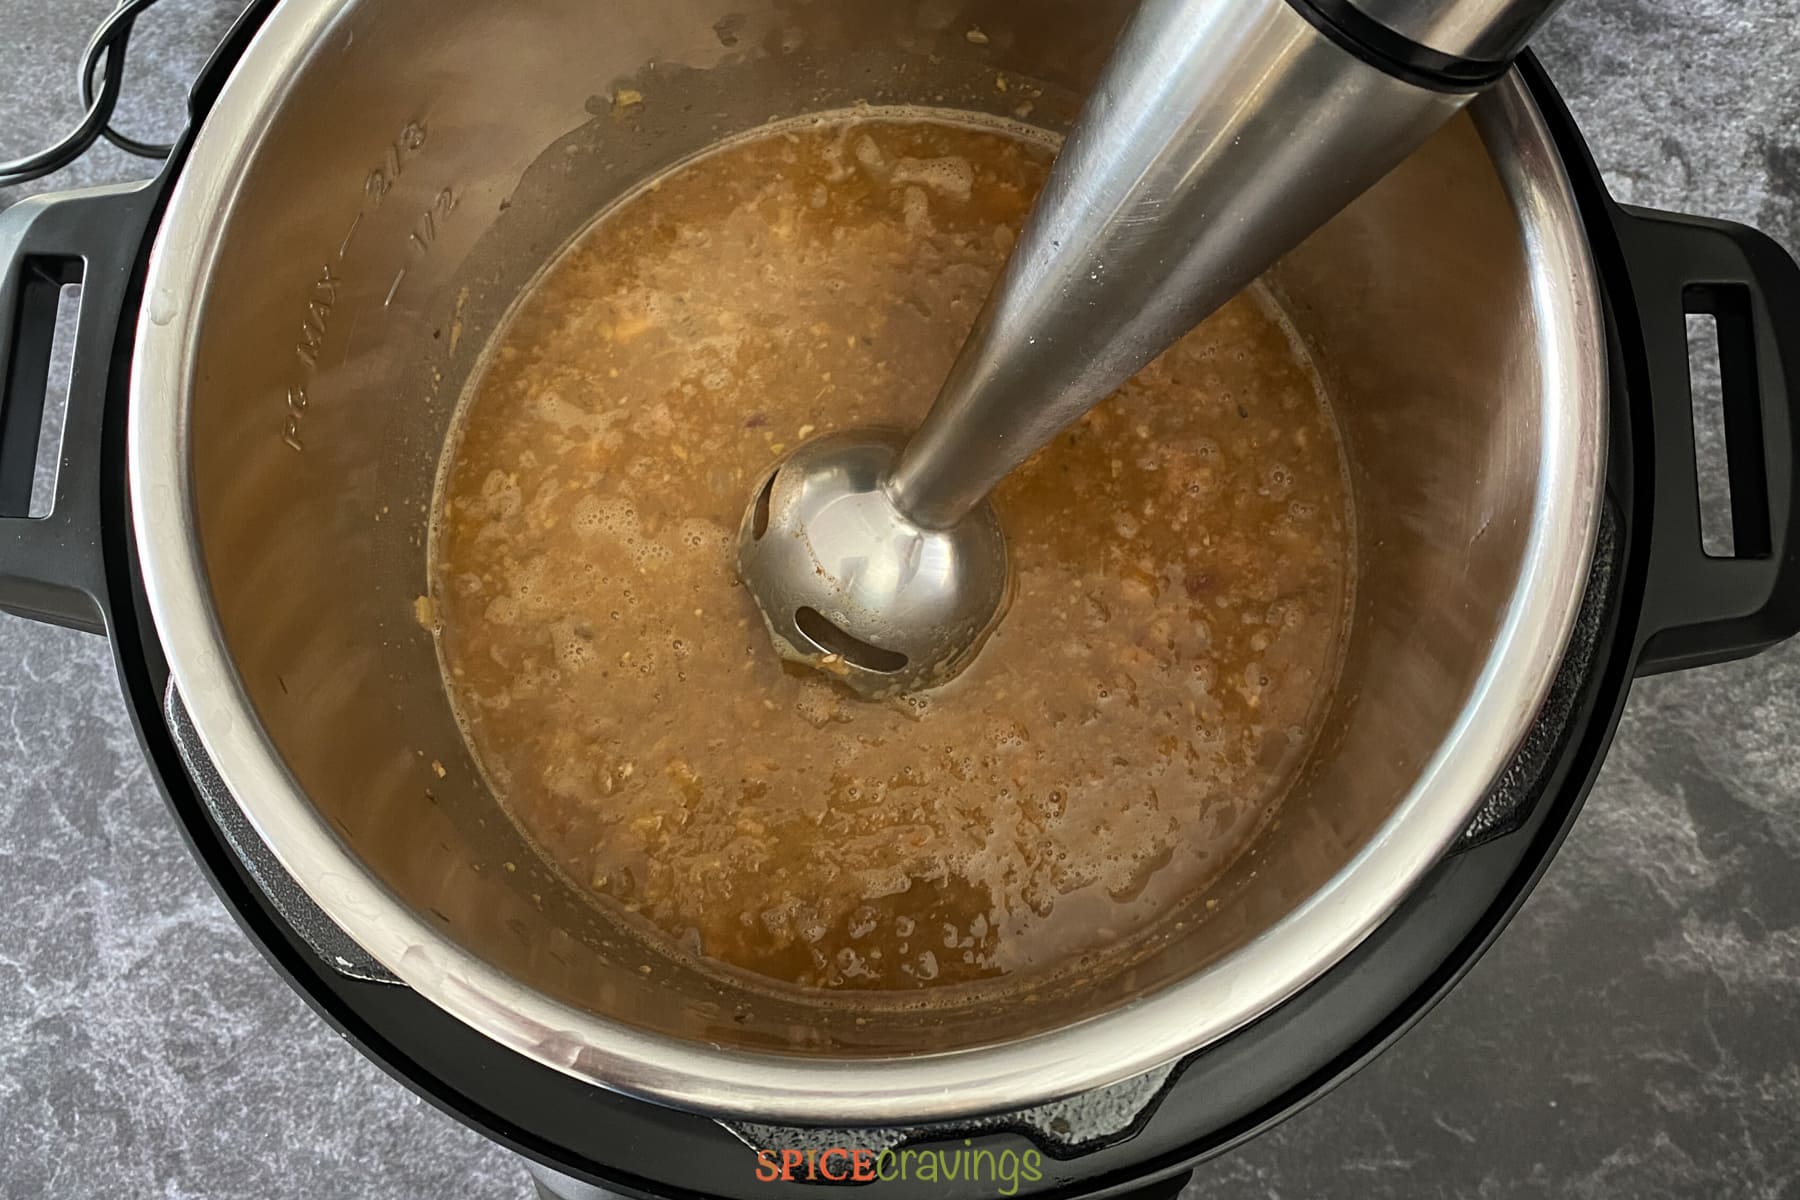 Mashing pinto beans after cooking